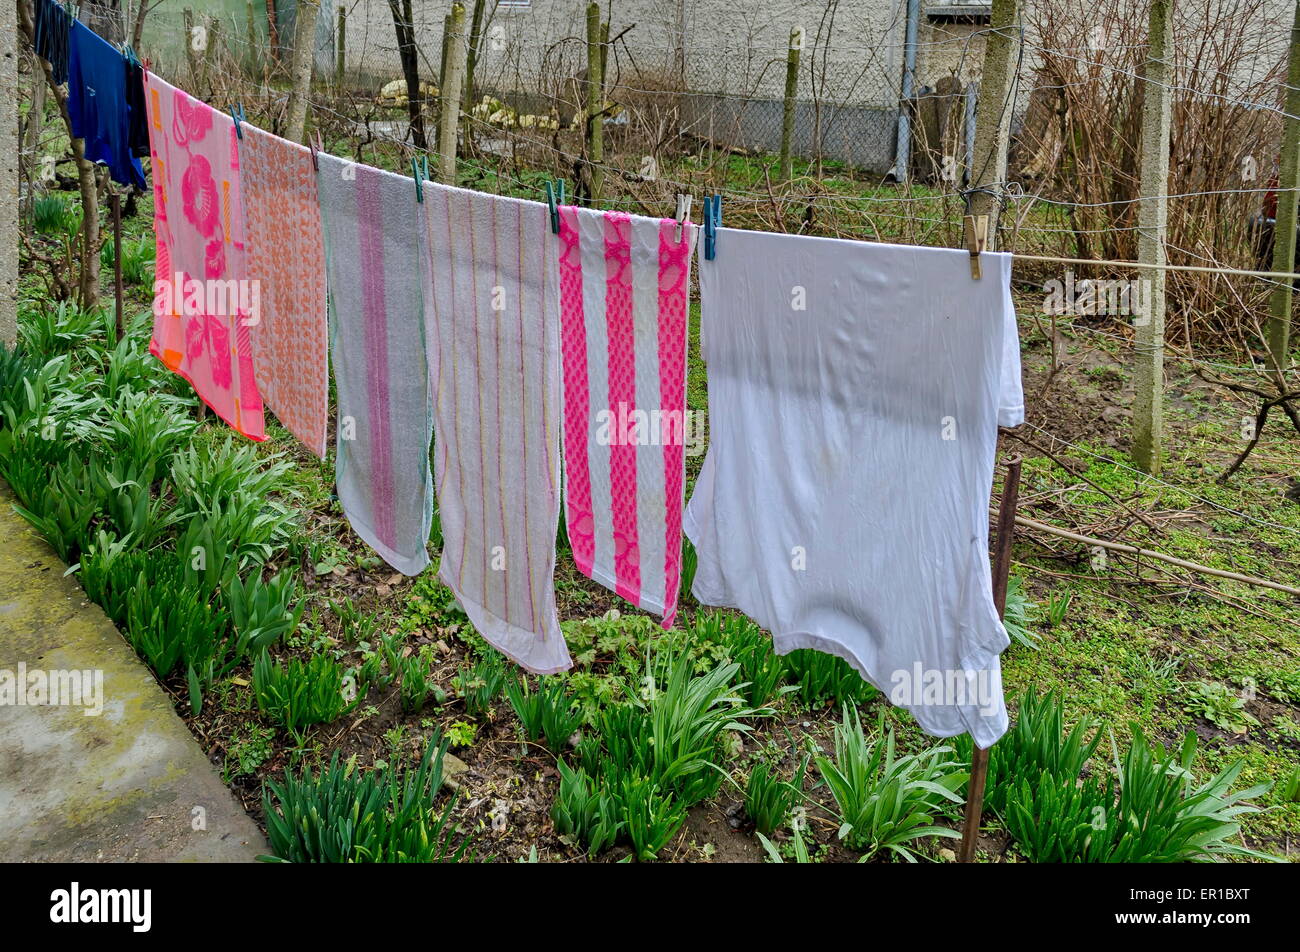 Washing clothing hang out in home yard Stock Photo